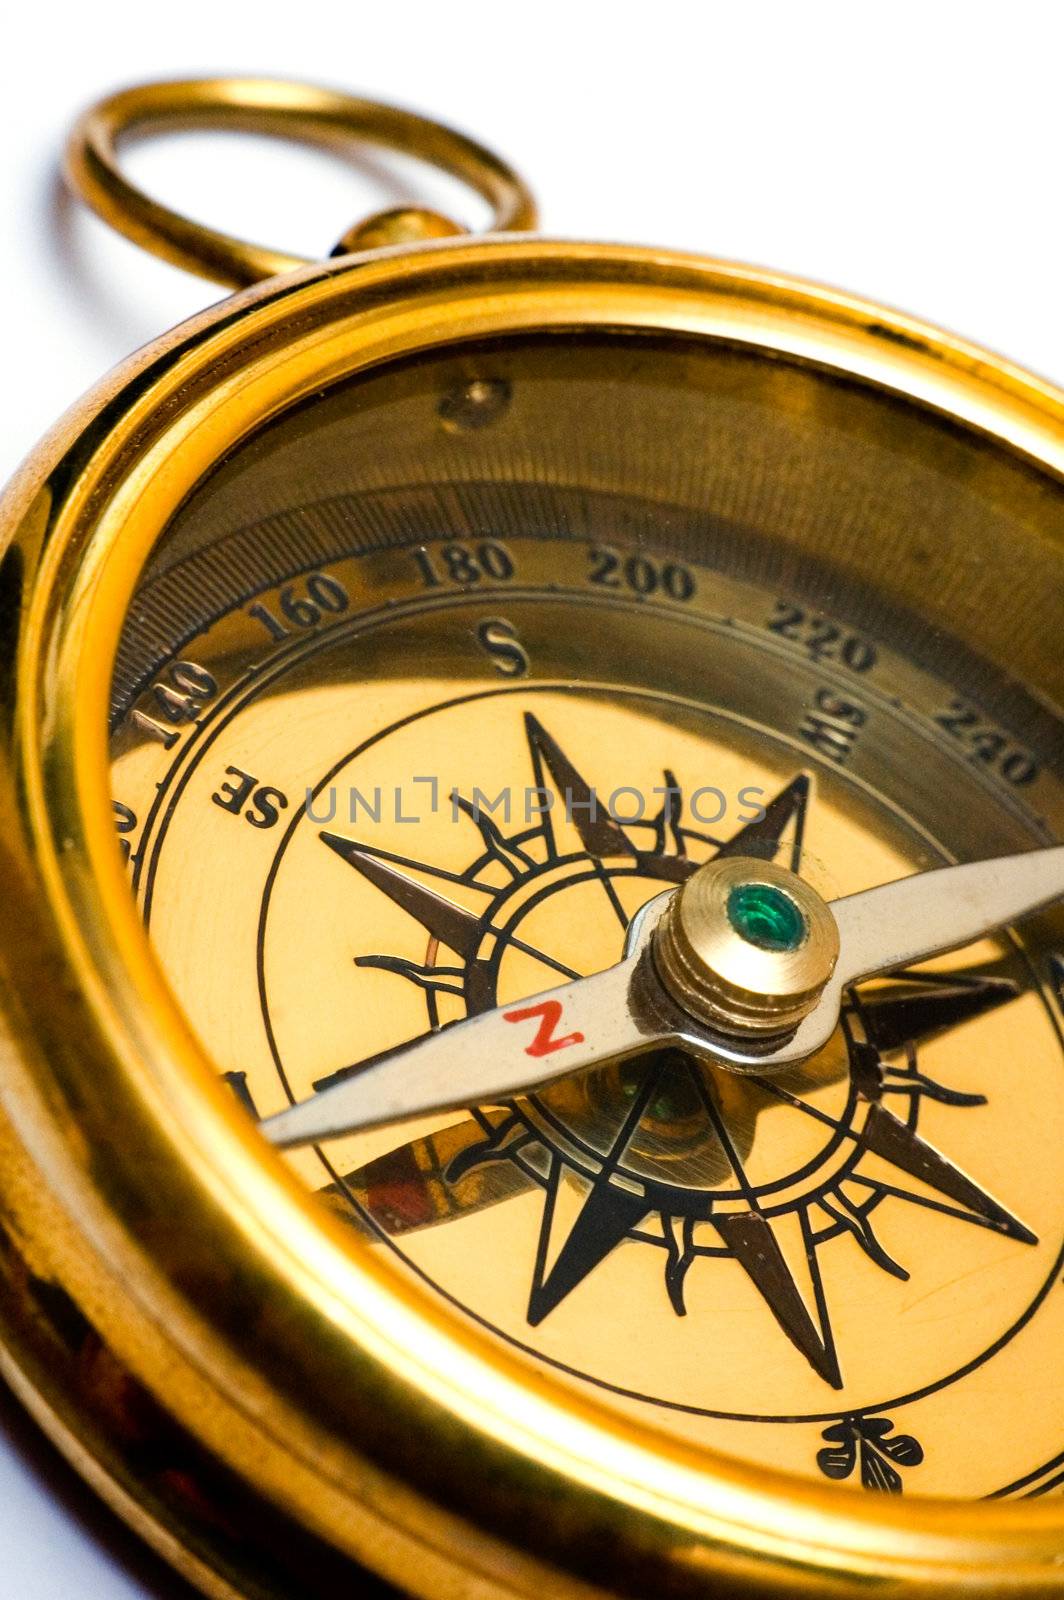 Old style brass compass by haveseen